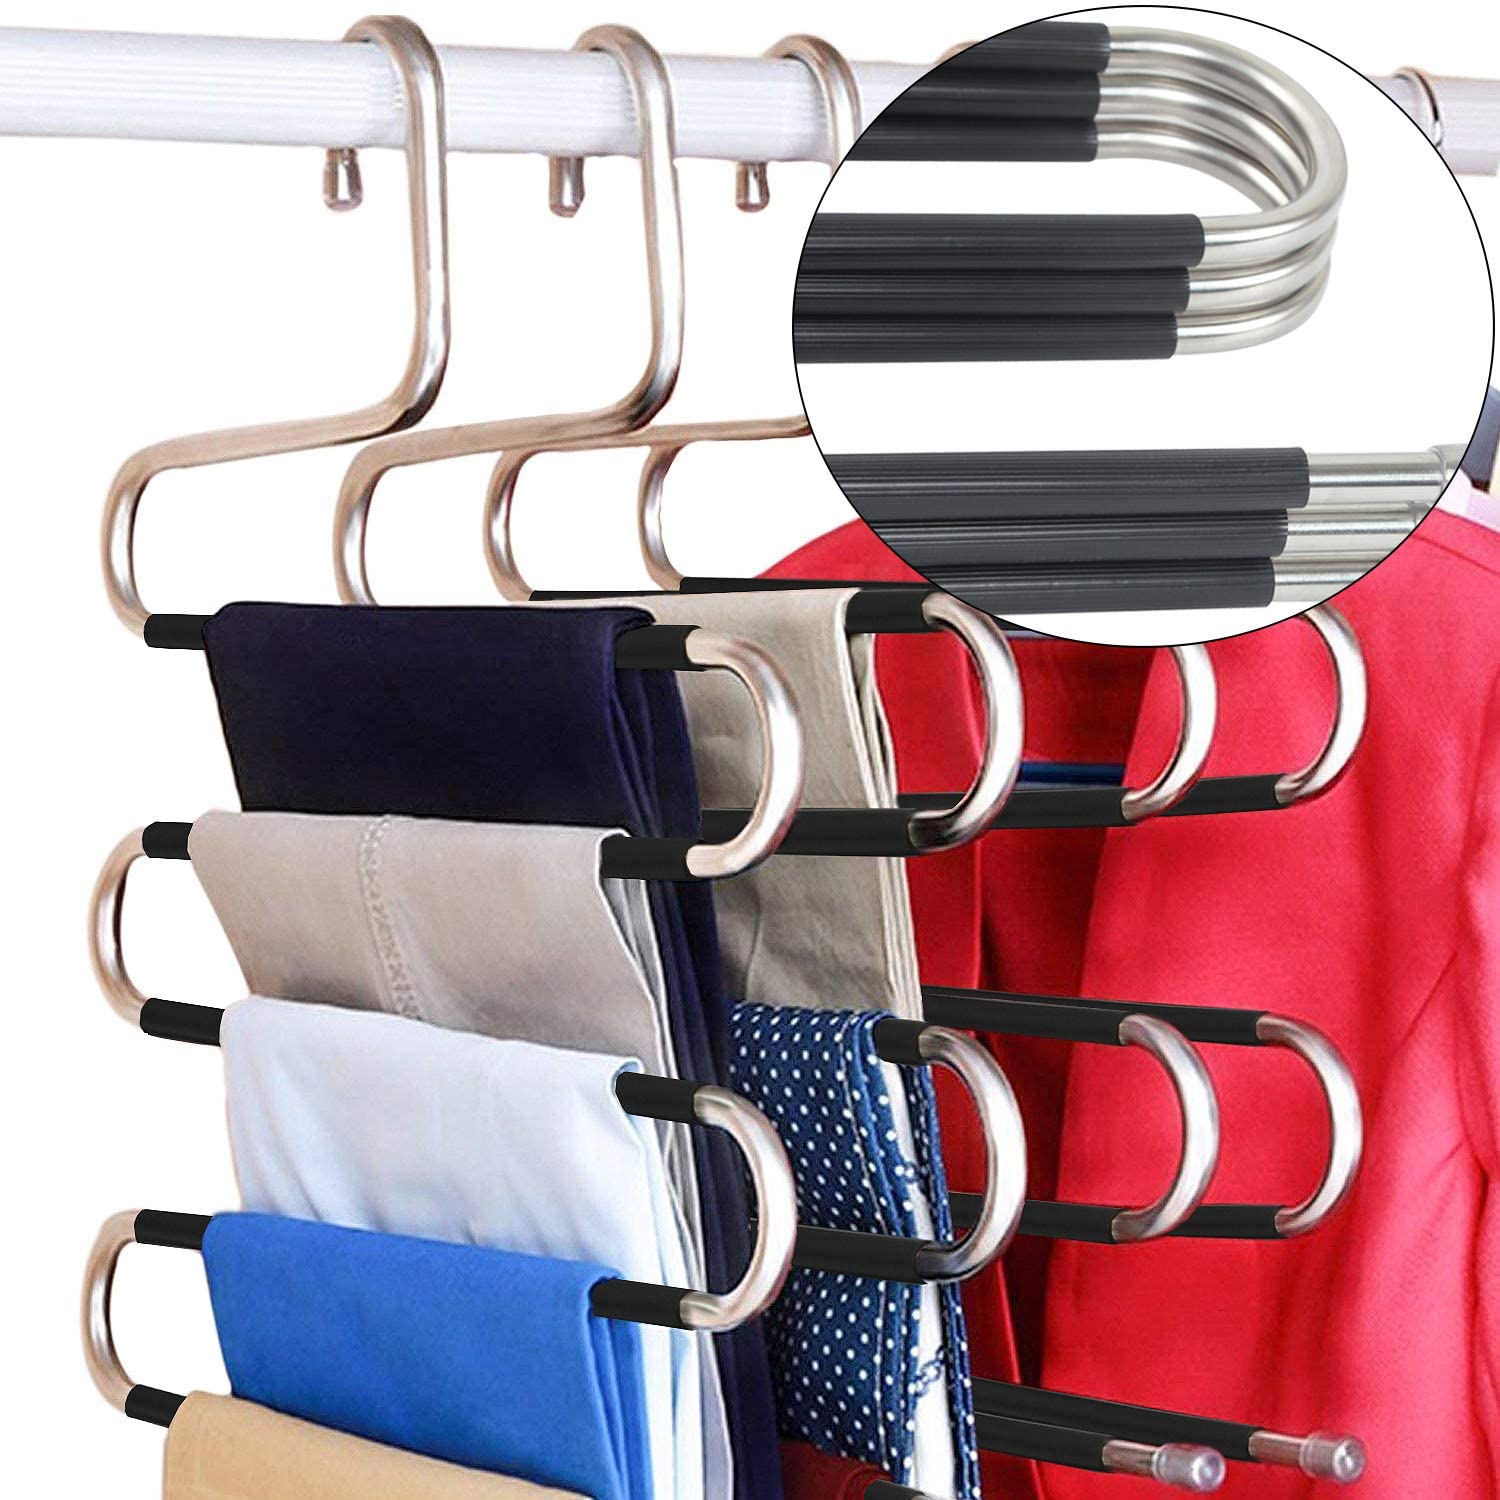 DOIOWN Stainless Steel Pants Hanger Organizer, 5-Pack